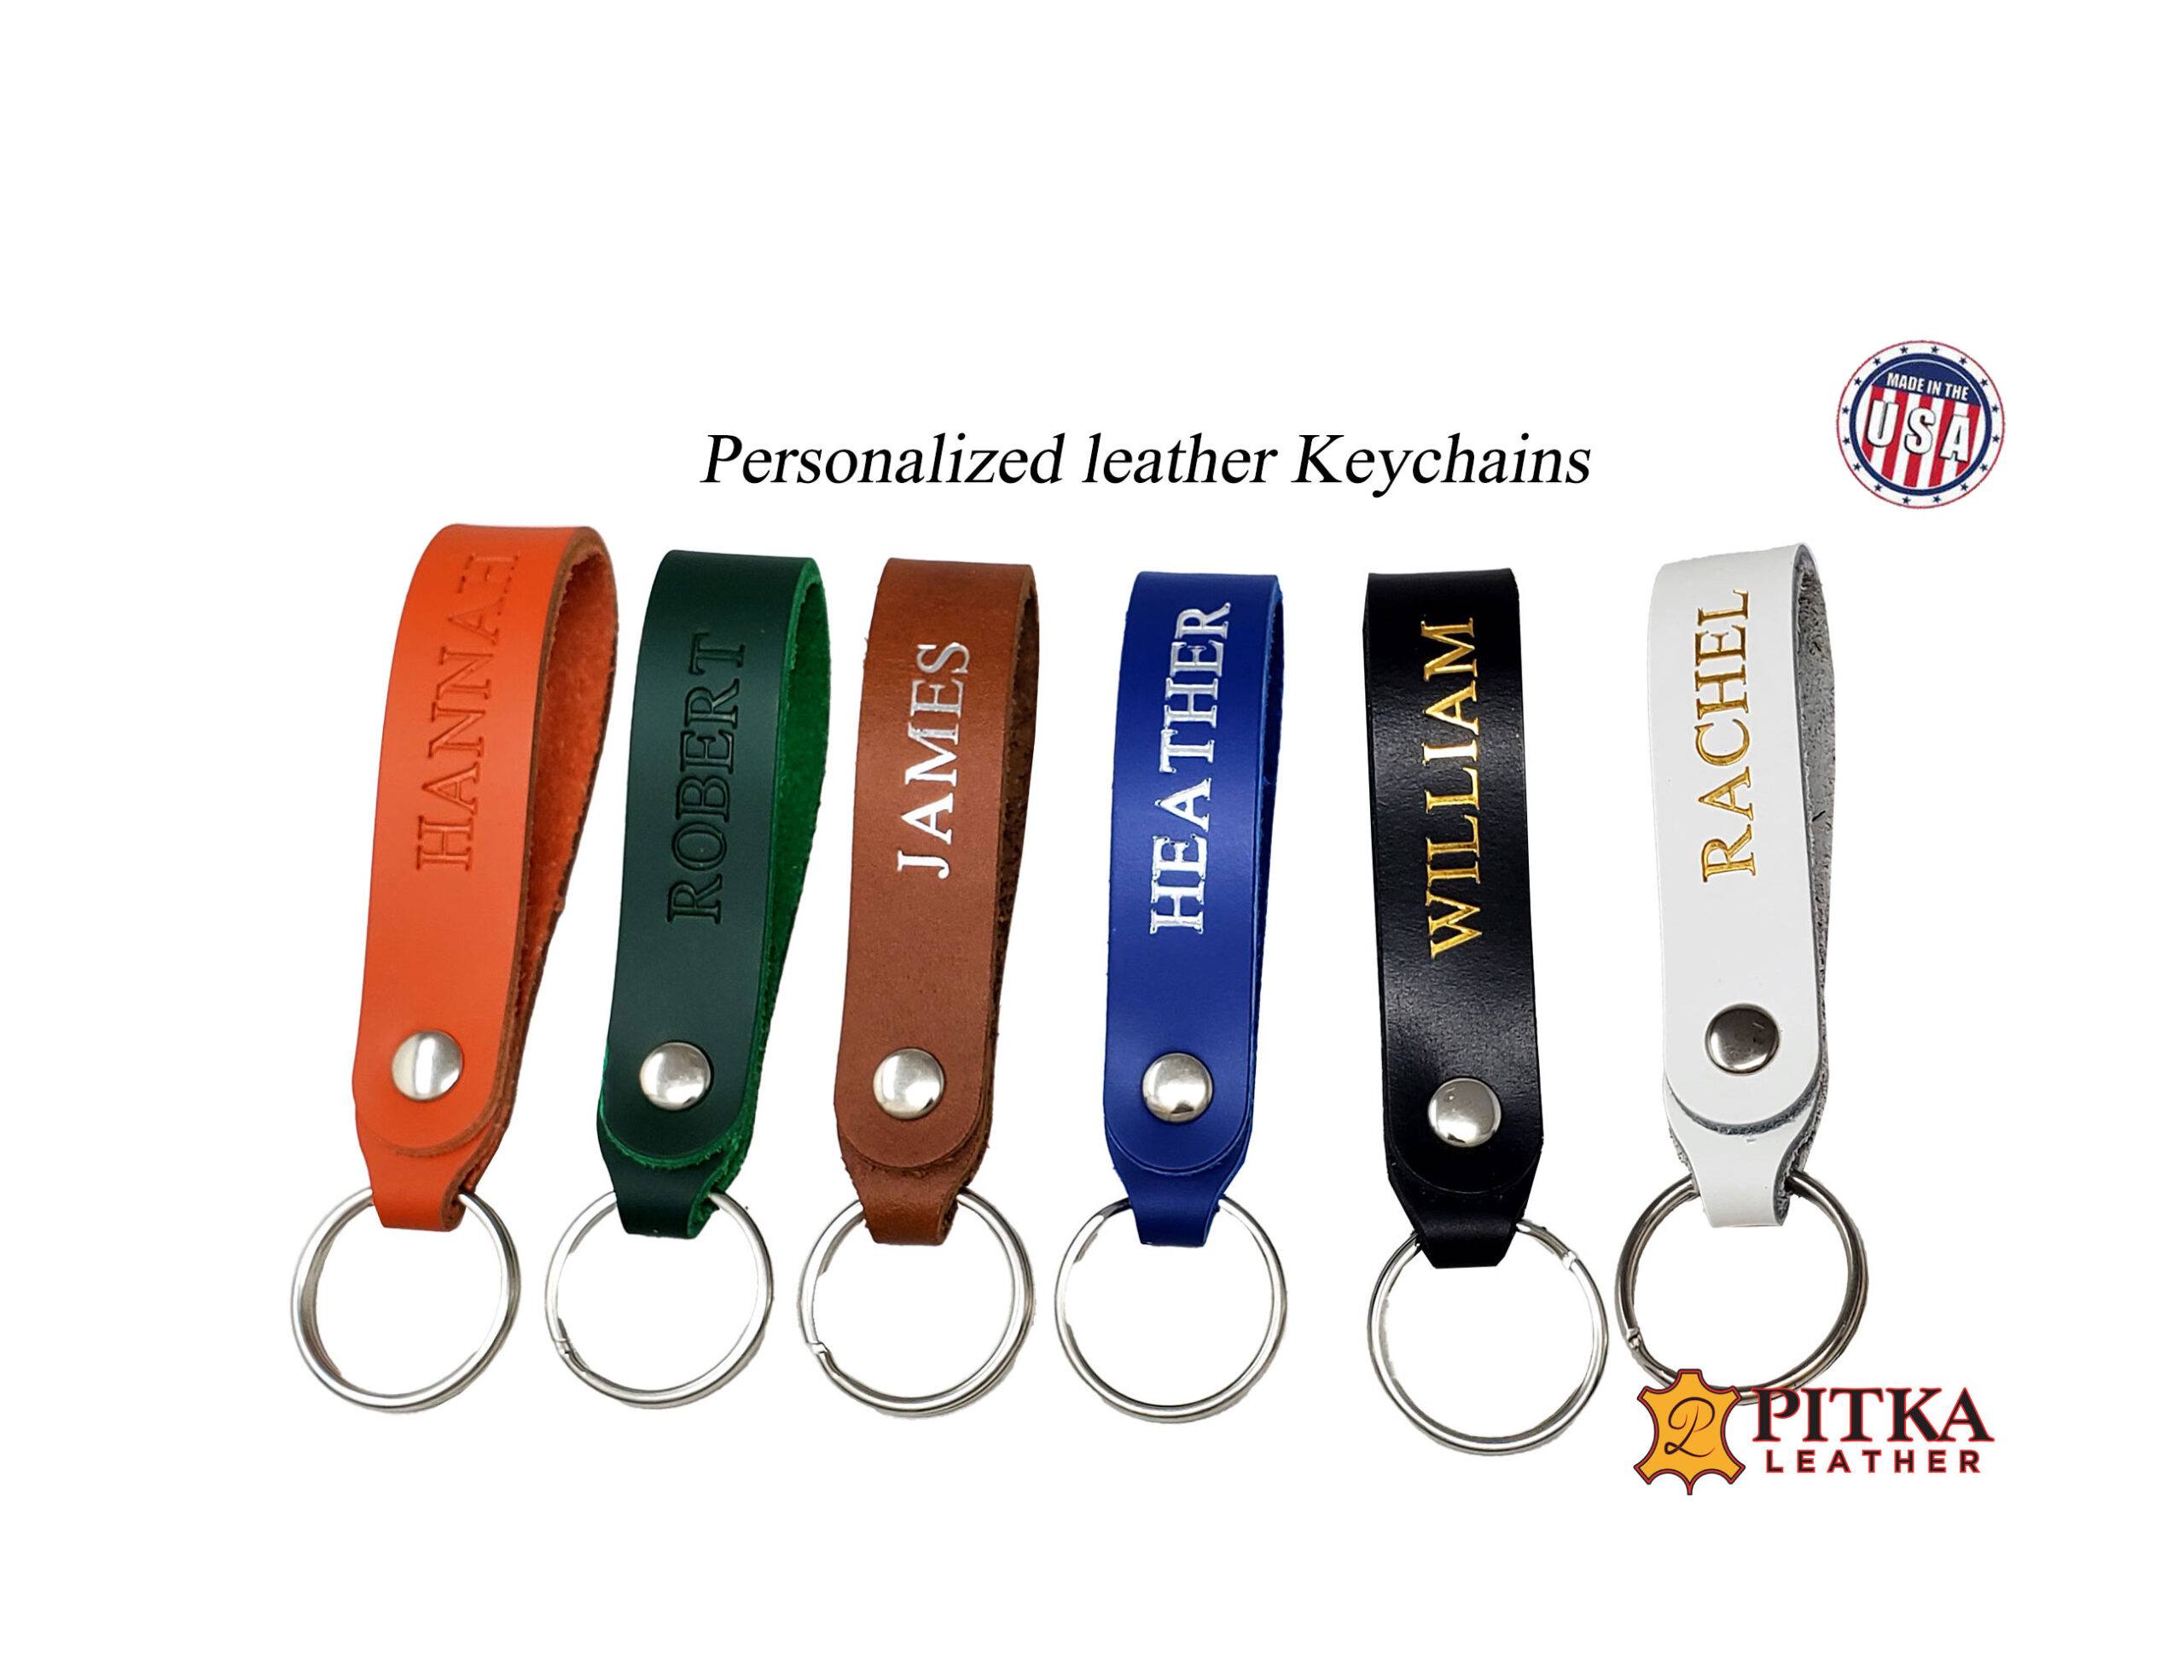 PitkaLeather Leather Keychains Blank - 8 Pack Natural Leather Keyrings - Stamping, Engraving, Tooling, Decorating Ready - Schools, Fundraising, Camps